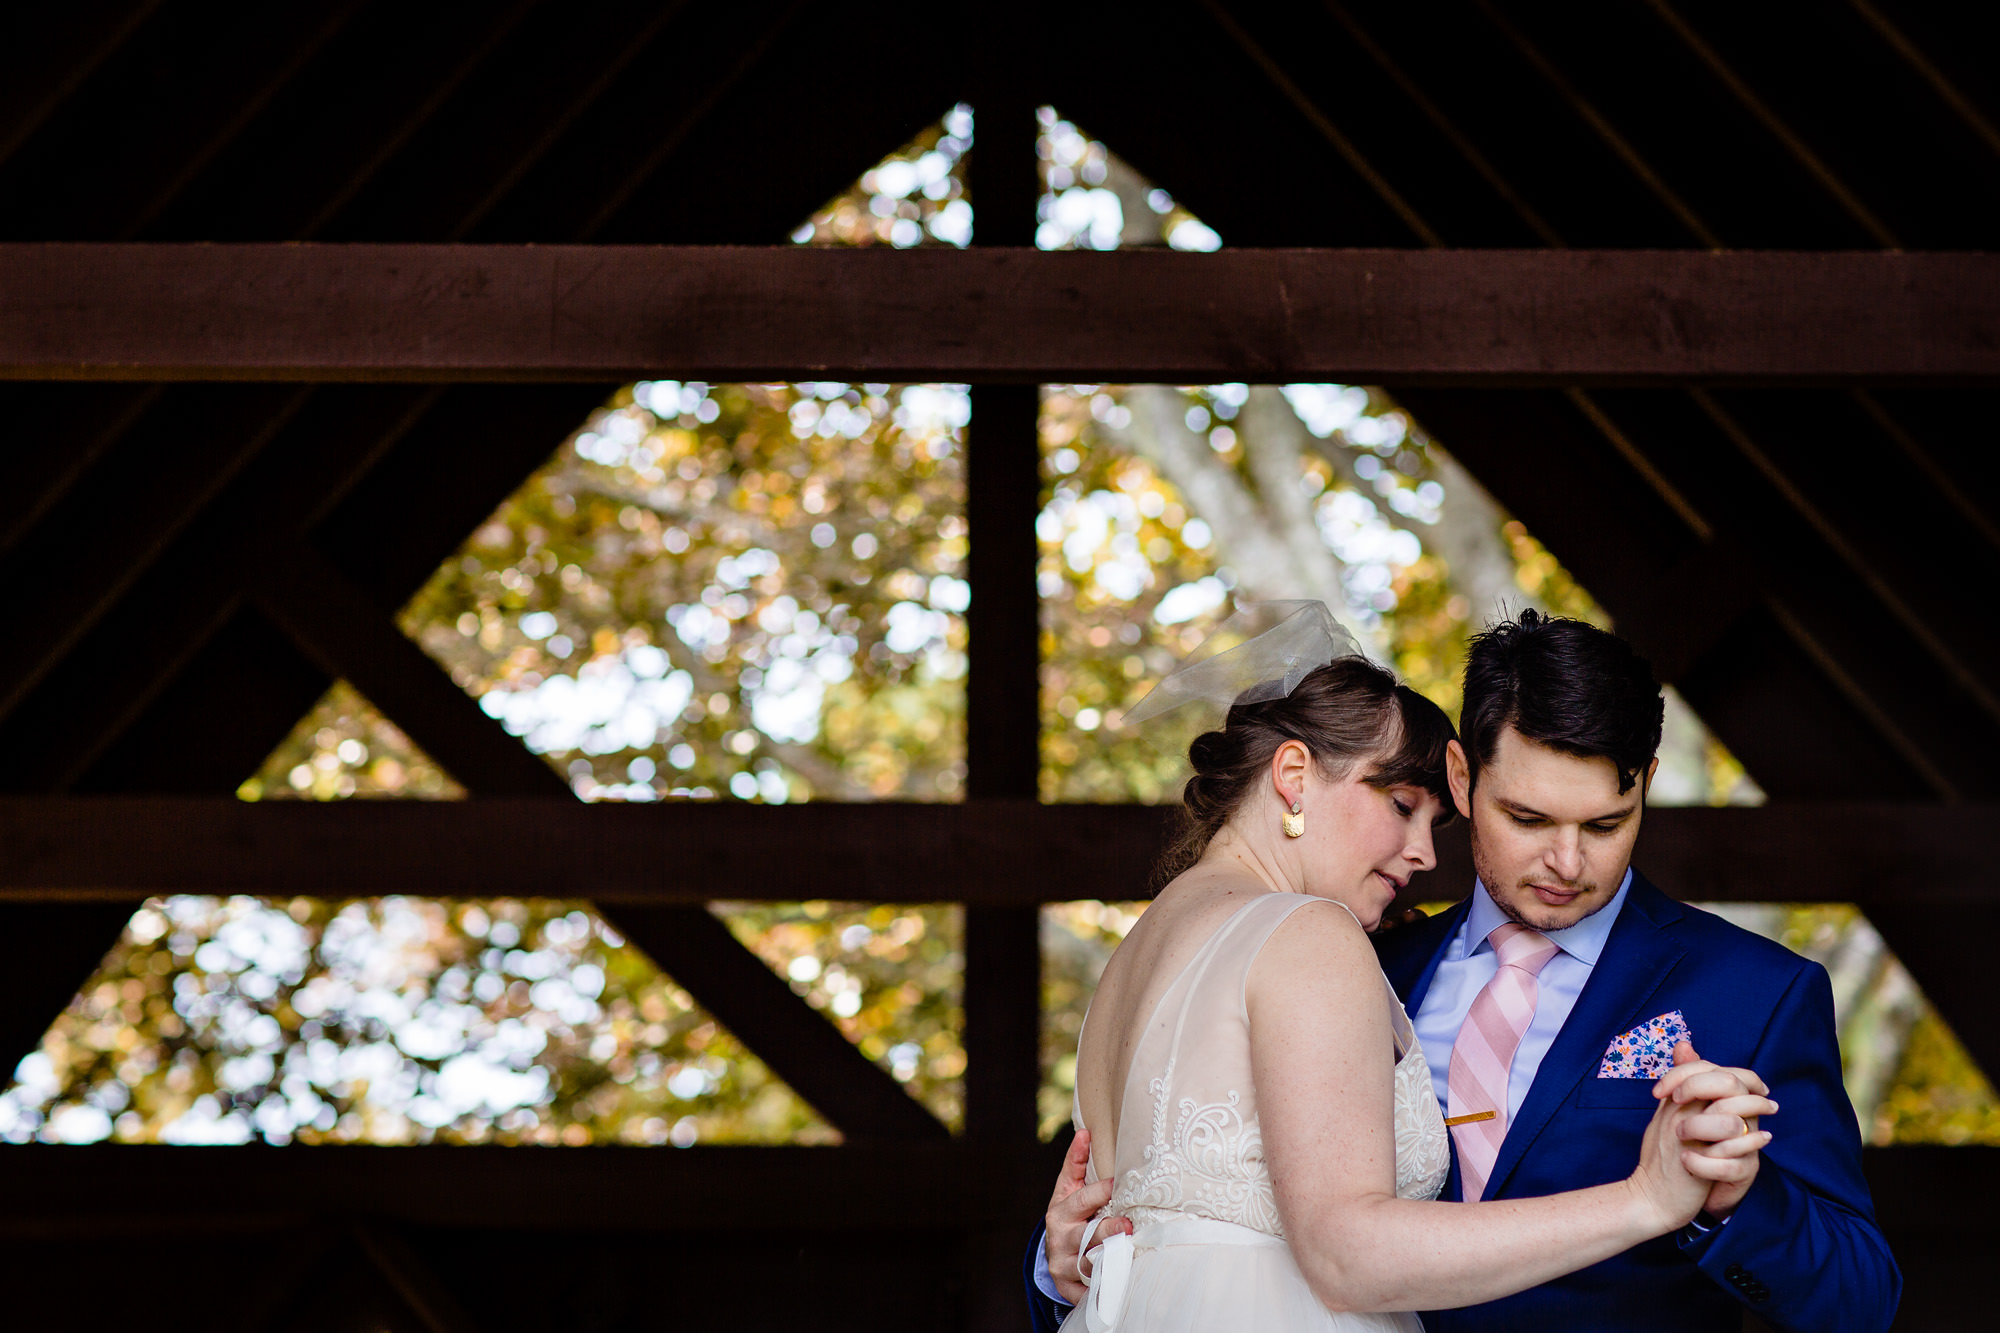 A bride and groom share a first dance at their elopement at the Vesper Hill Children's Chapel in Maine